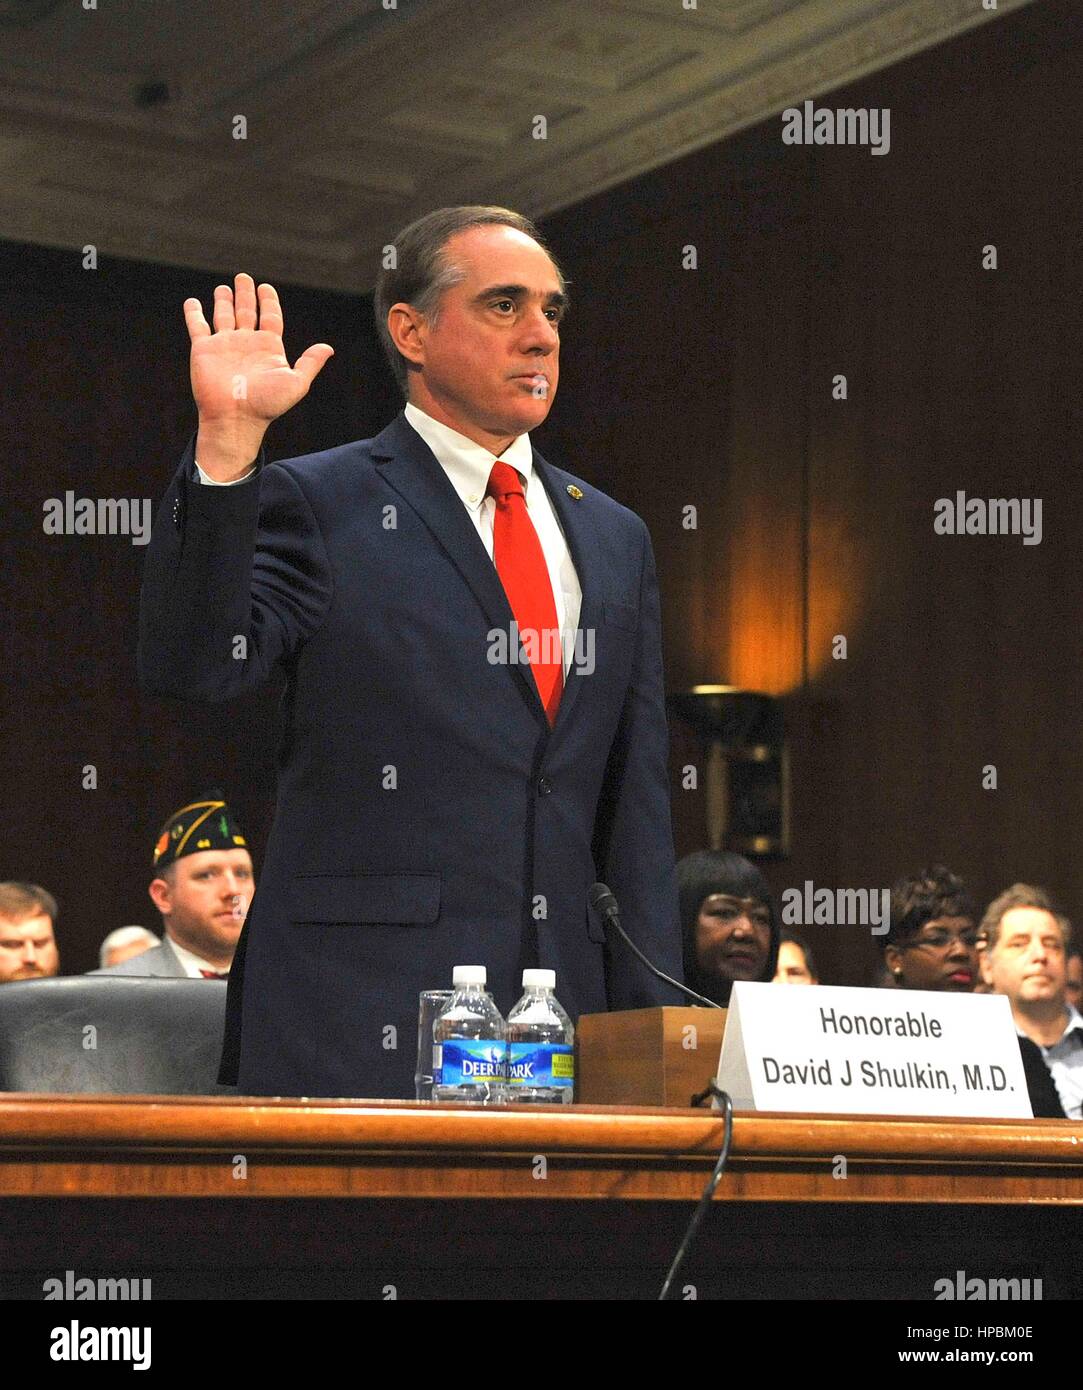 U.S. Under Secretary of Veterans Affairs Dr. David Shulkin is sworn in before testifying in the Senate Veterans Affairs Committee on his nomination as Secretary of the Department of Veterans Affairs February 1, 2017 in Washington, DC. Shulkin was confirmed as the new head of the Veterans Affairs administration by a unanimous vote. Stock Photo